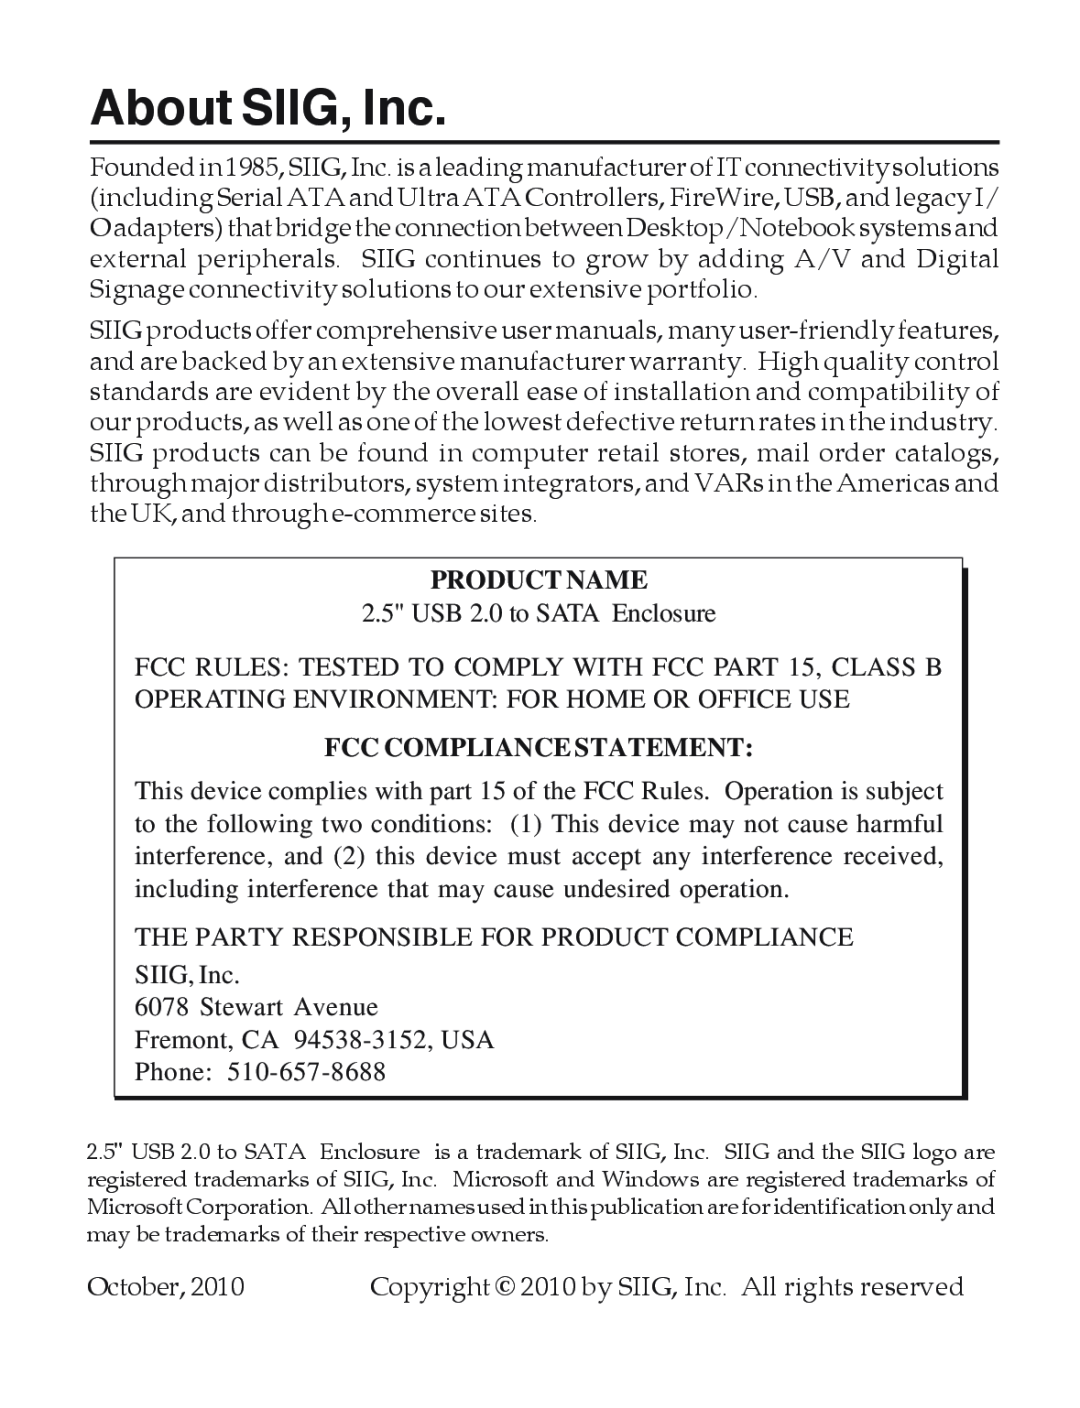 SIIG 5090S manual About SIIG, Inc, Product Name, Fcc Compliance Statement 